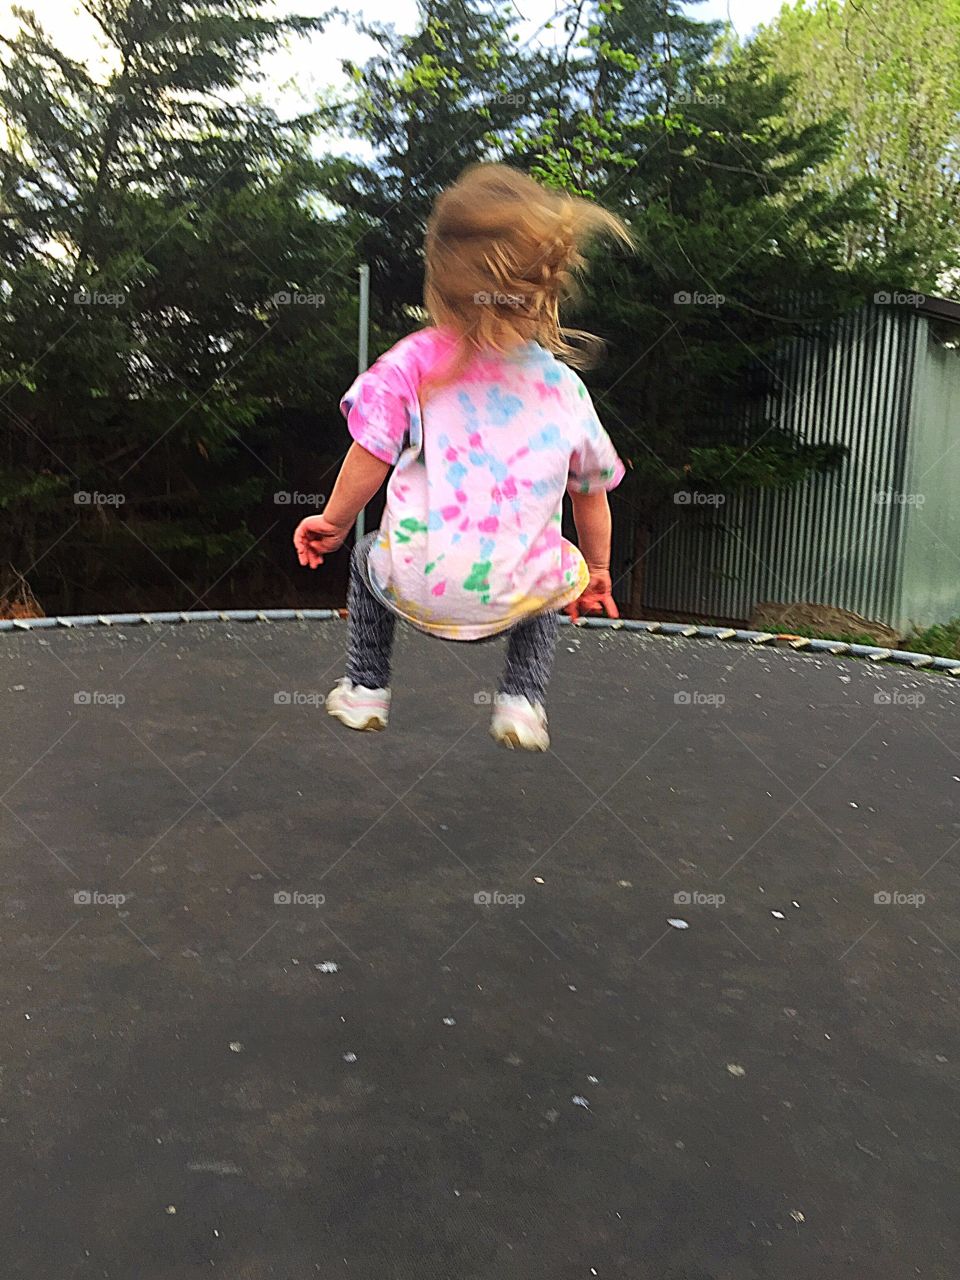 Jumping on a Trampoline 